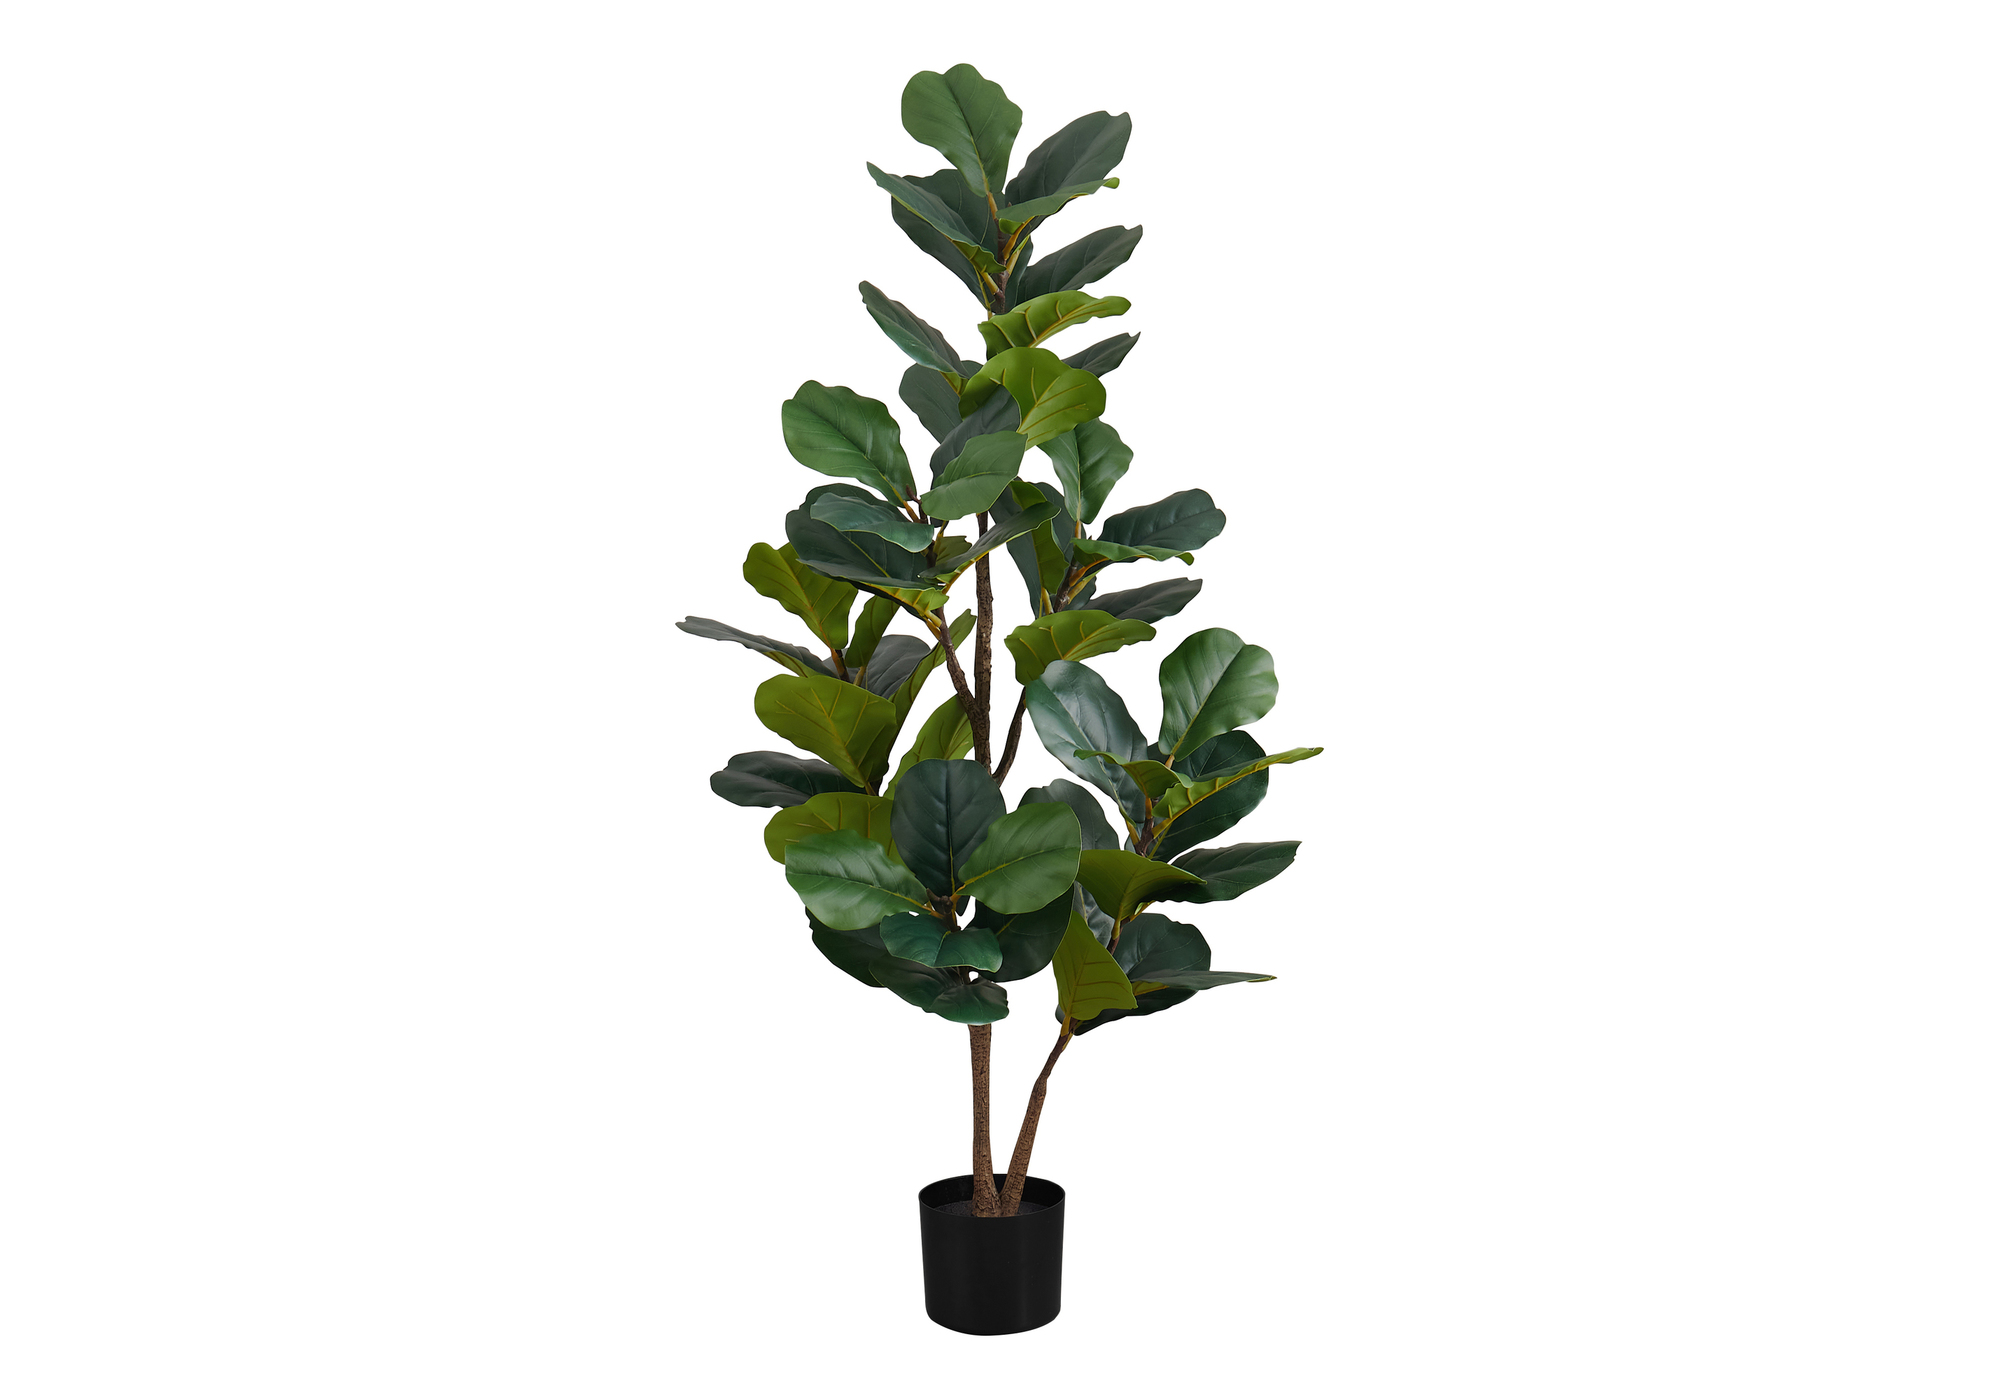 ARTIFICIAL PLANT - 49"H / INDOOR FIDDLE TREE IN A 5" POT